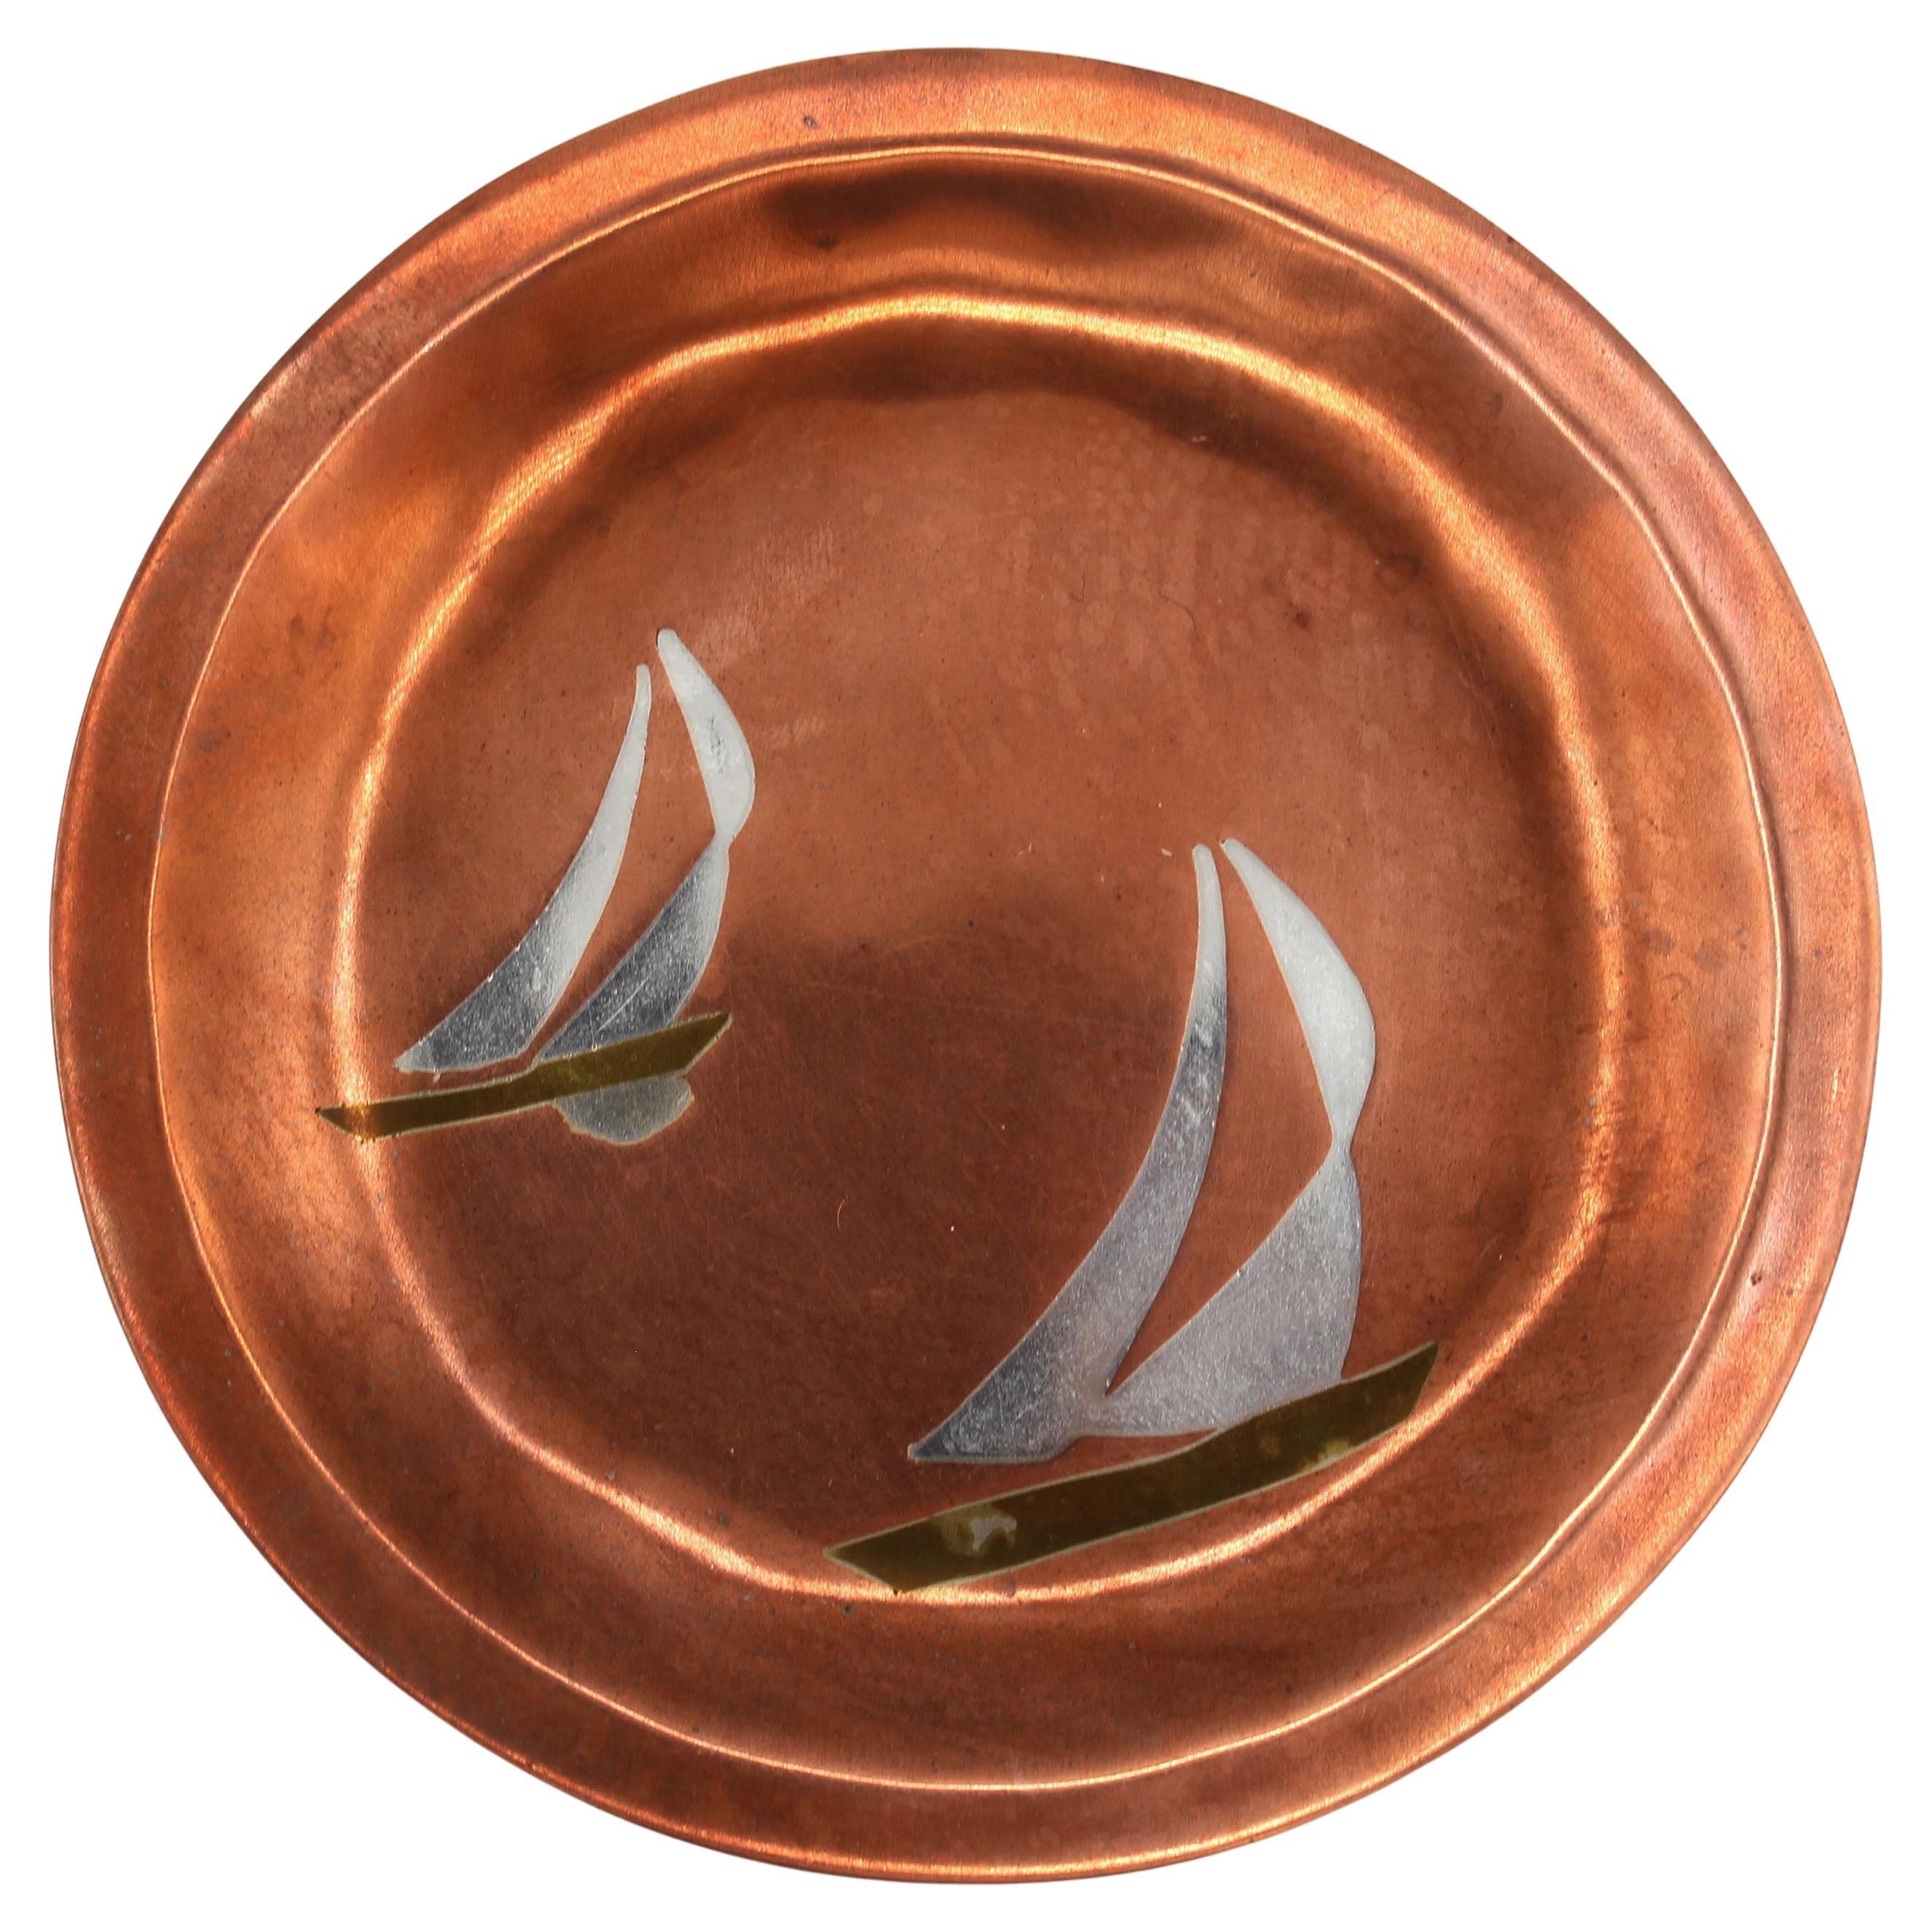 Calling Card Tray Featuring Racing Yachts, circa 1950s by Los Costillo, Taxco For Sale